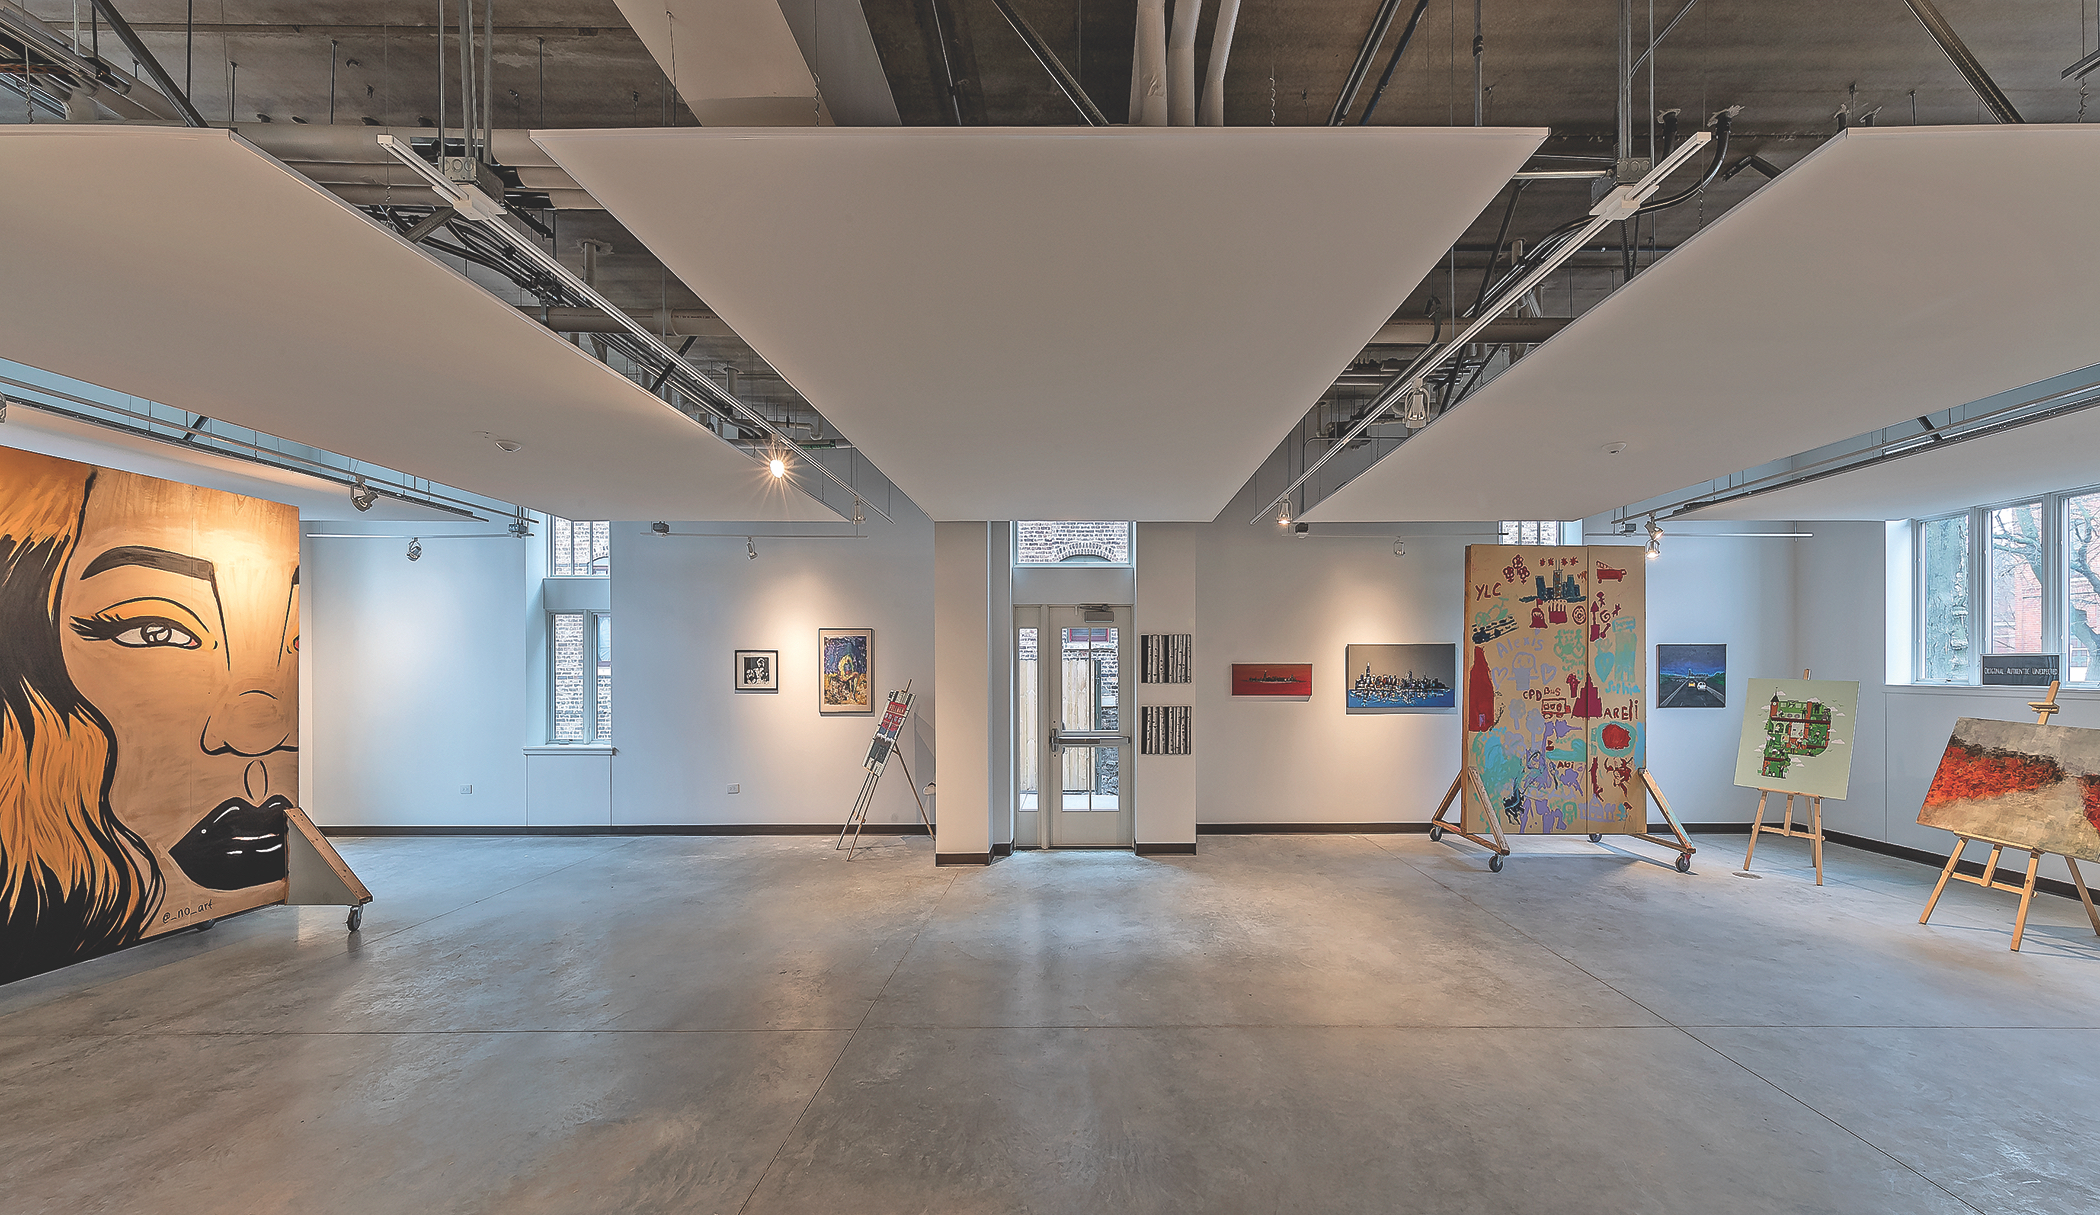 The $14 million Pullman Artspace Lofts complex in Chicago has a studio space/gallery and a community space for arts education and after-school programming. Photo: Mark Ballogg